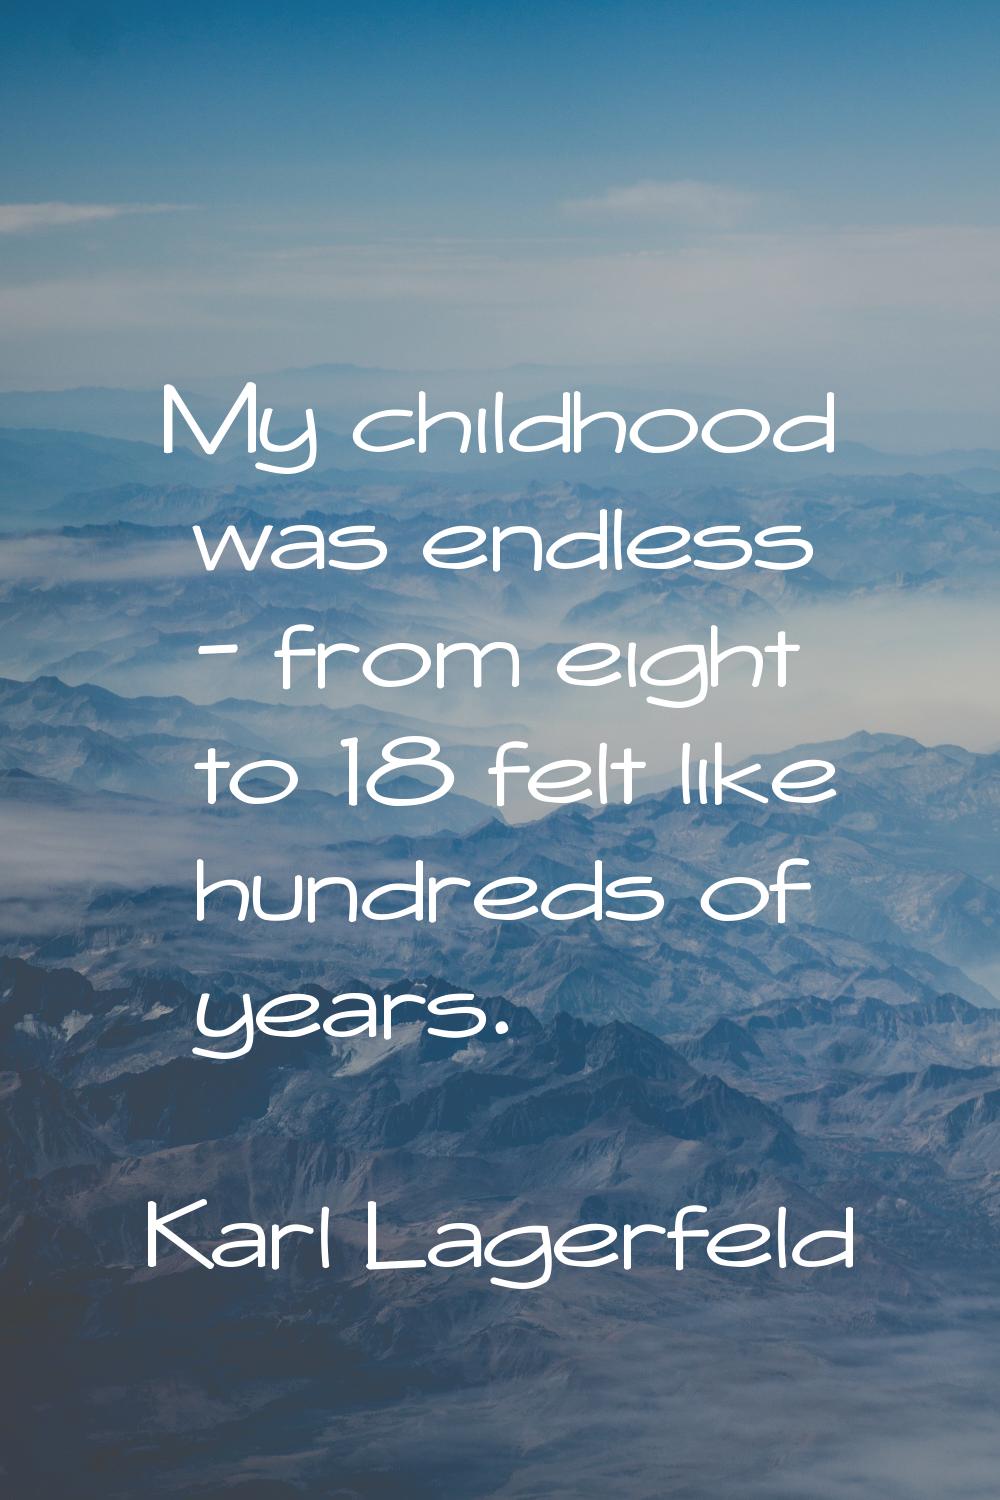 My childhood was endless - from eight to 18 felt like hundreds of years.